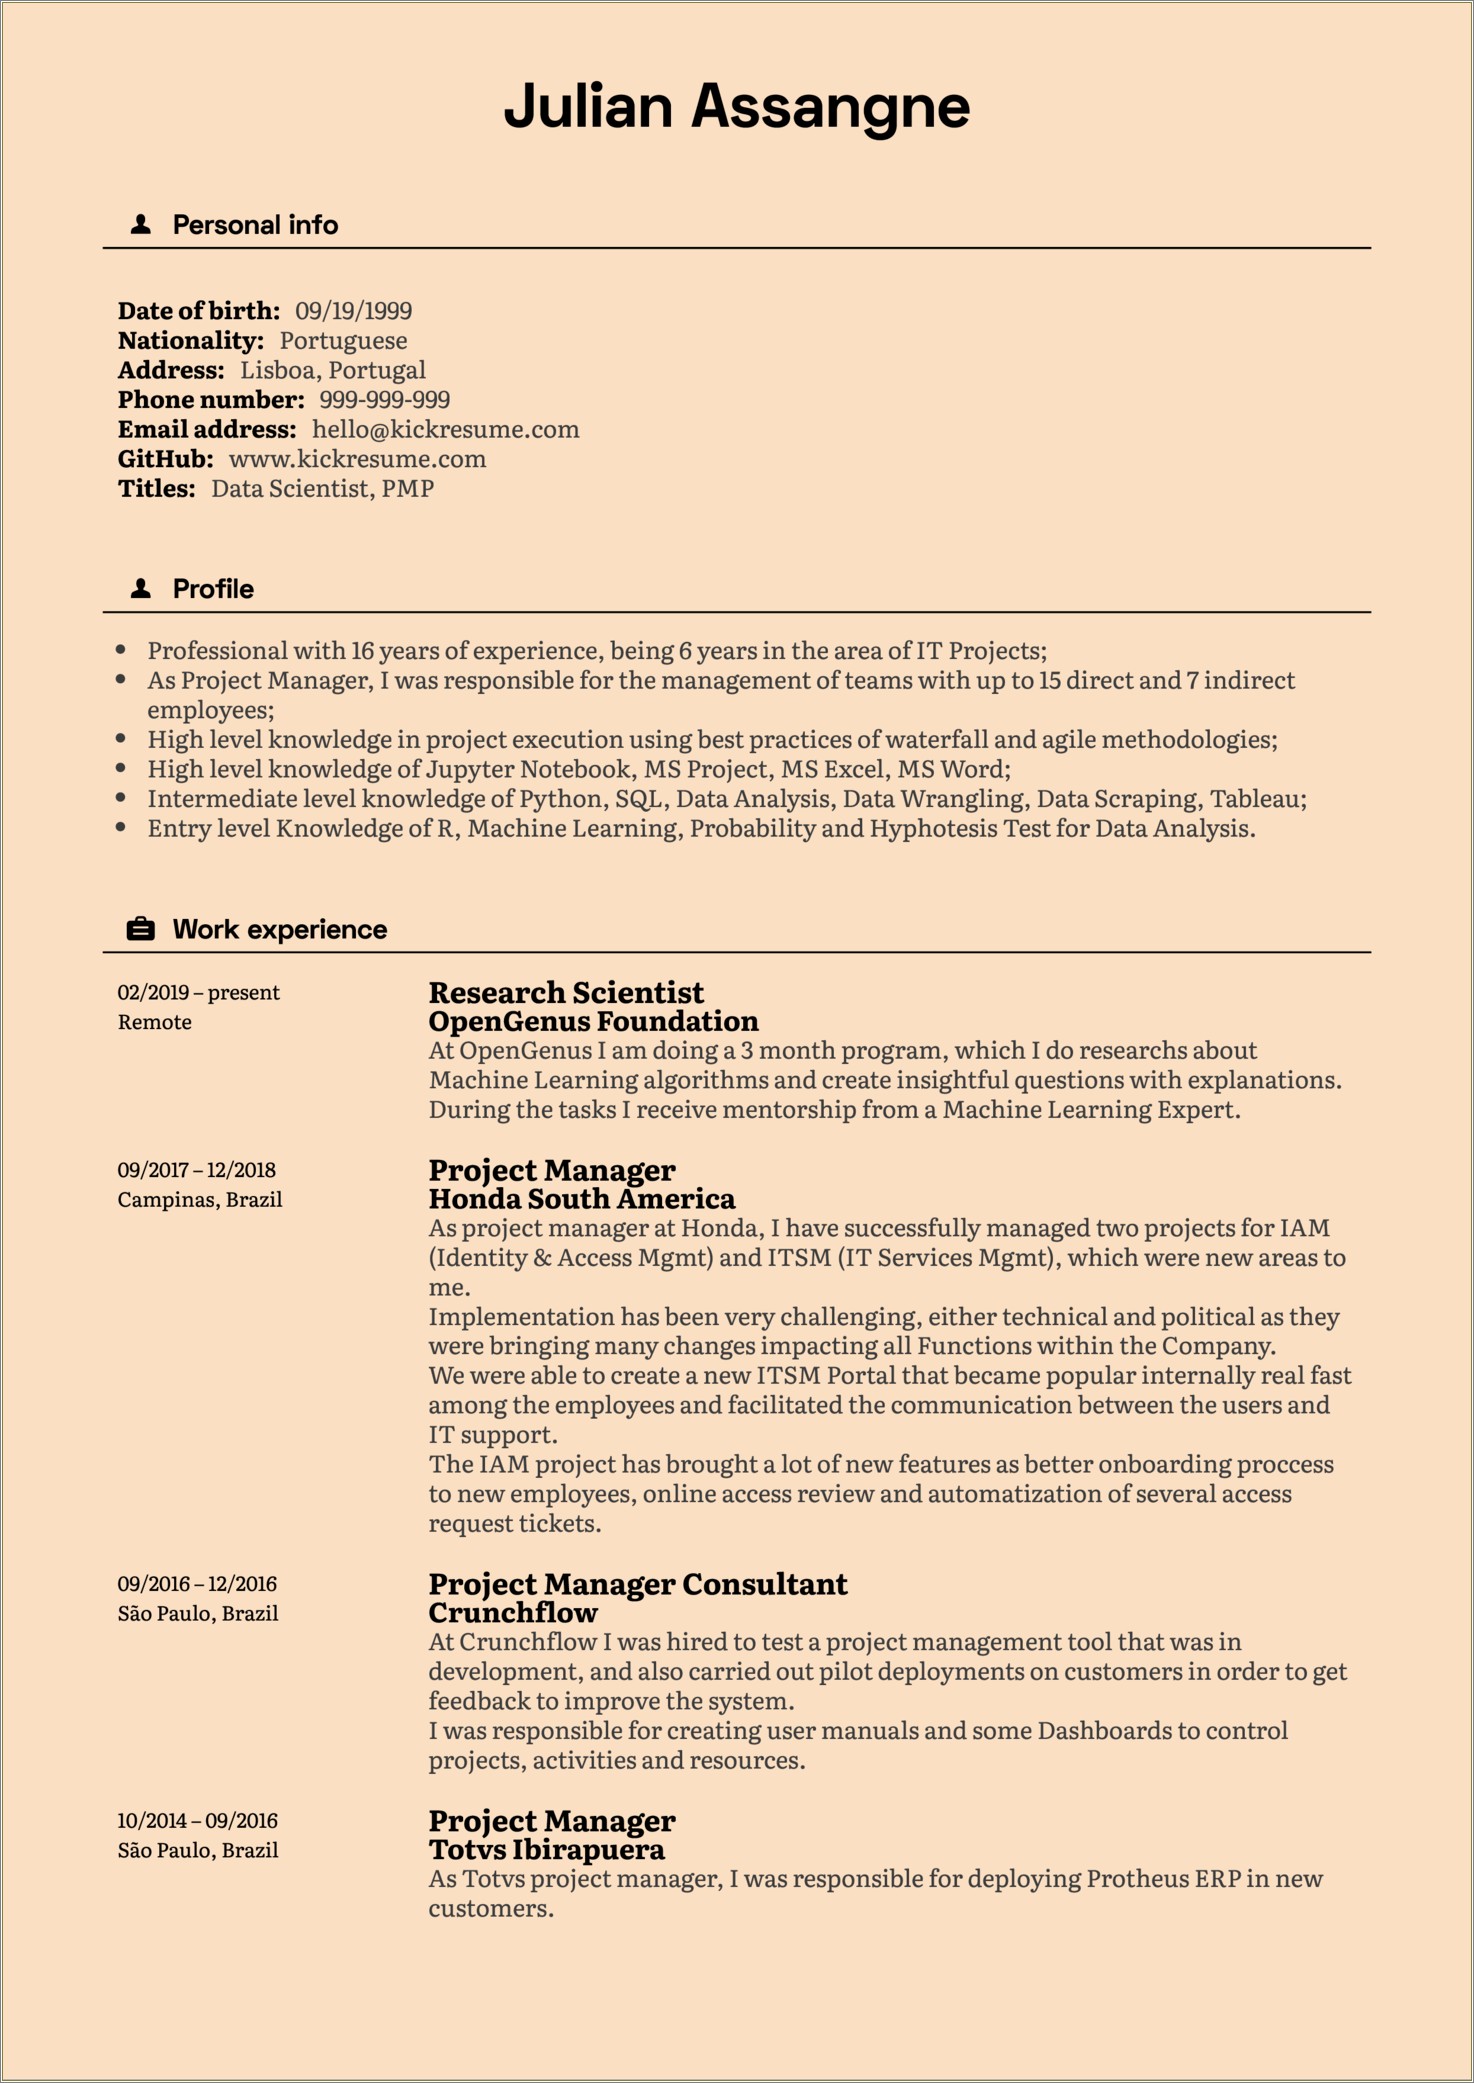 Applying To A Project Management Firm Resumes